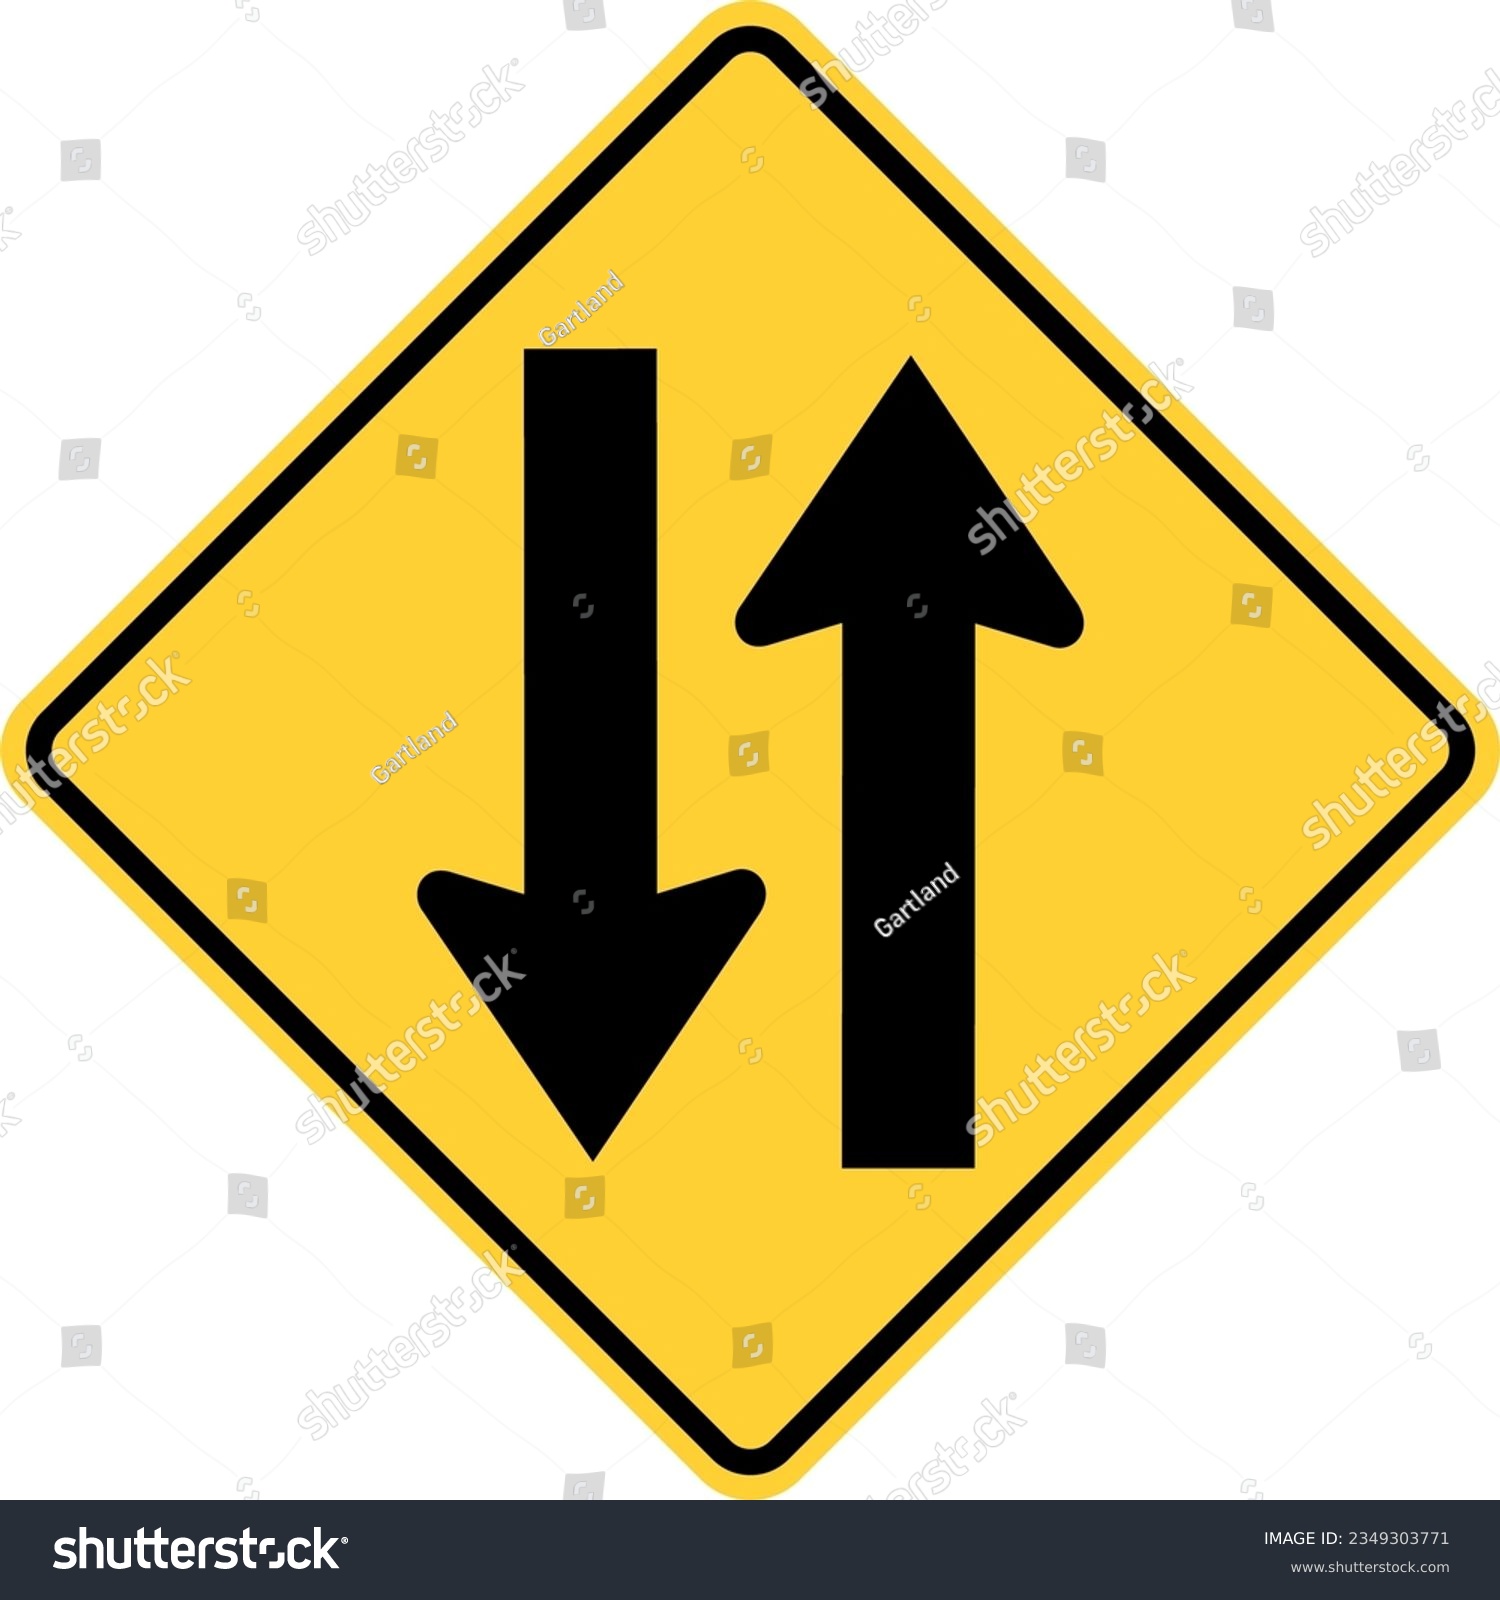 SVG of Vector graphic of a usa two way traffic highway sign. It consists of two black arrows indicating the direction of traffic flow within a black and yellow square tilted to 45 degrees svg